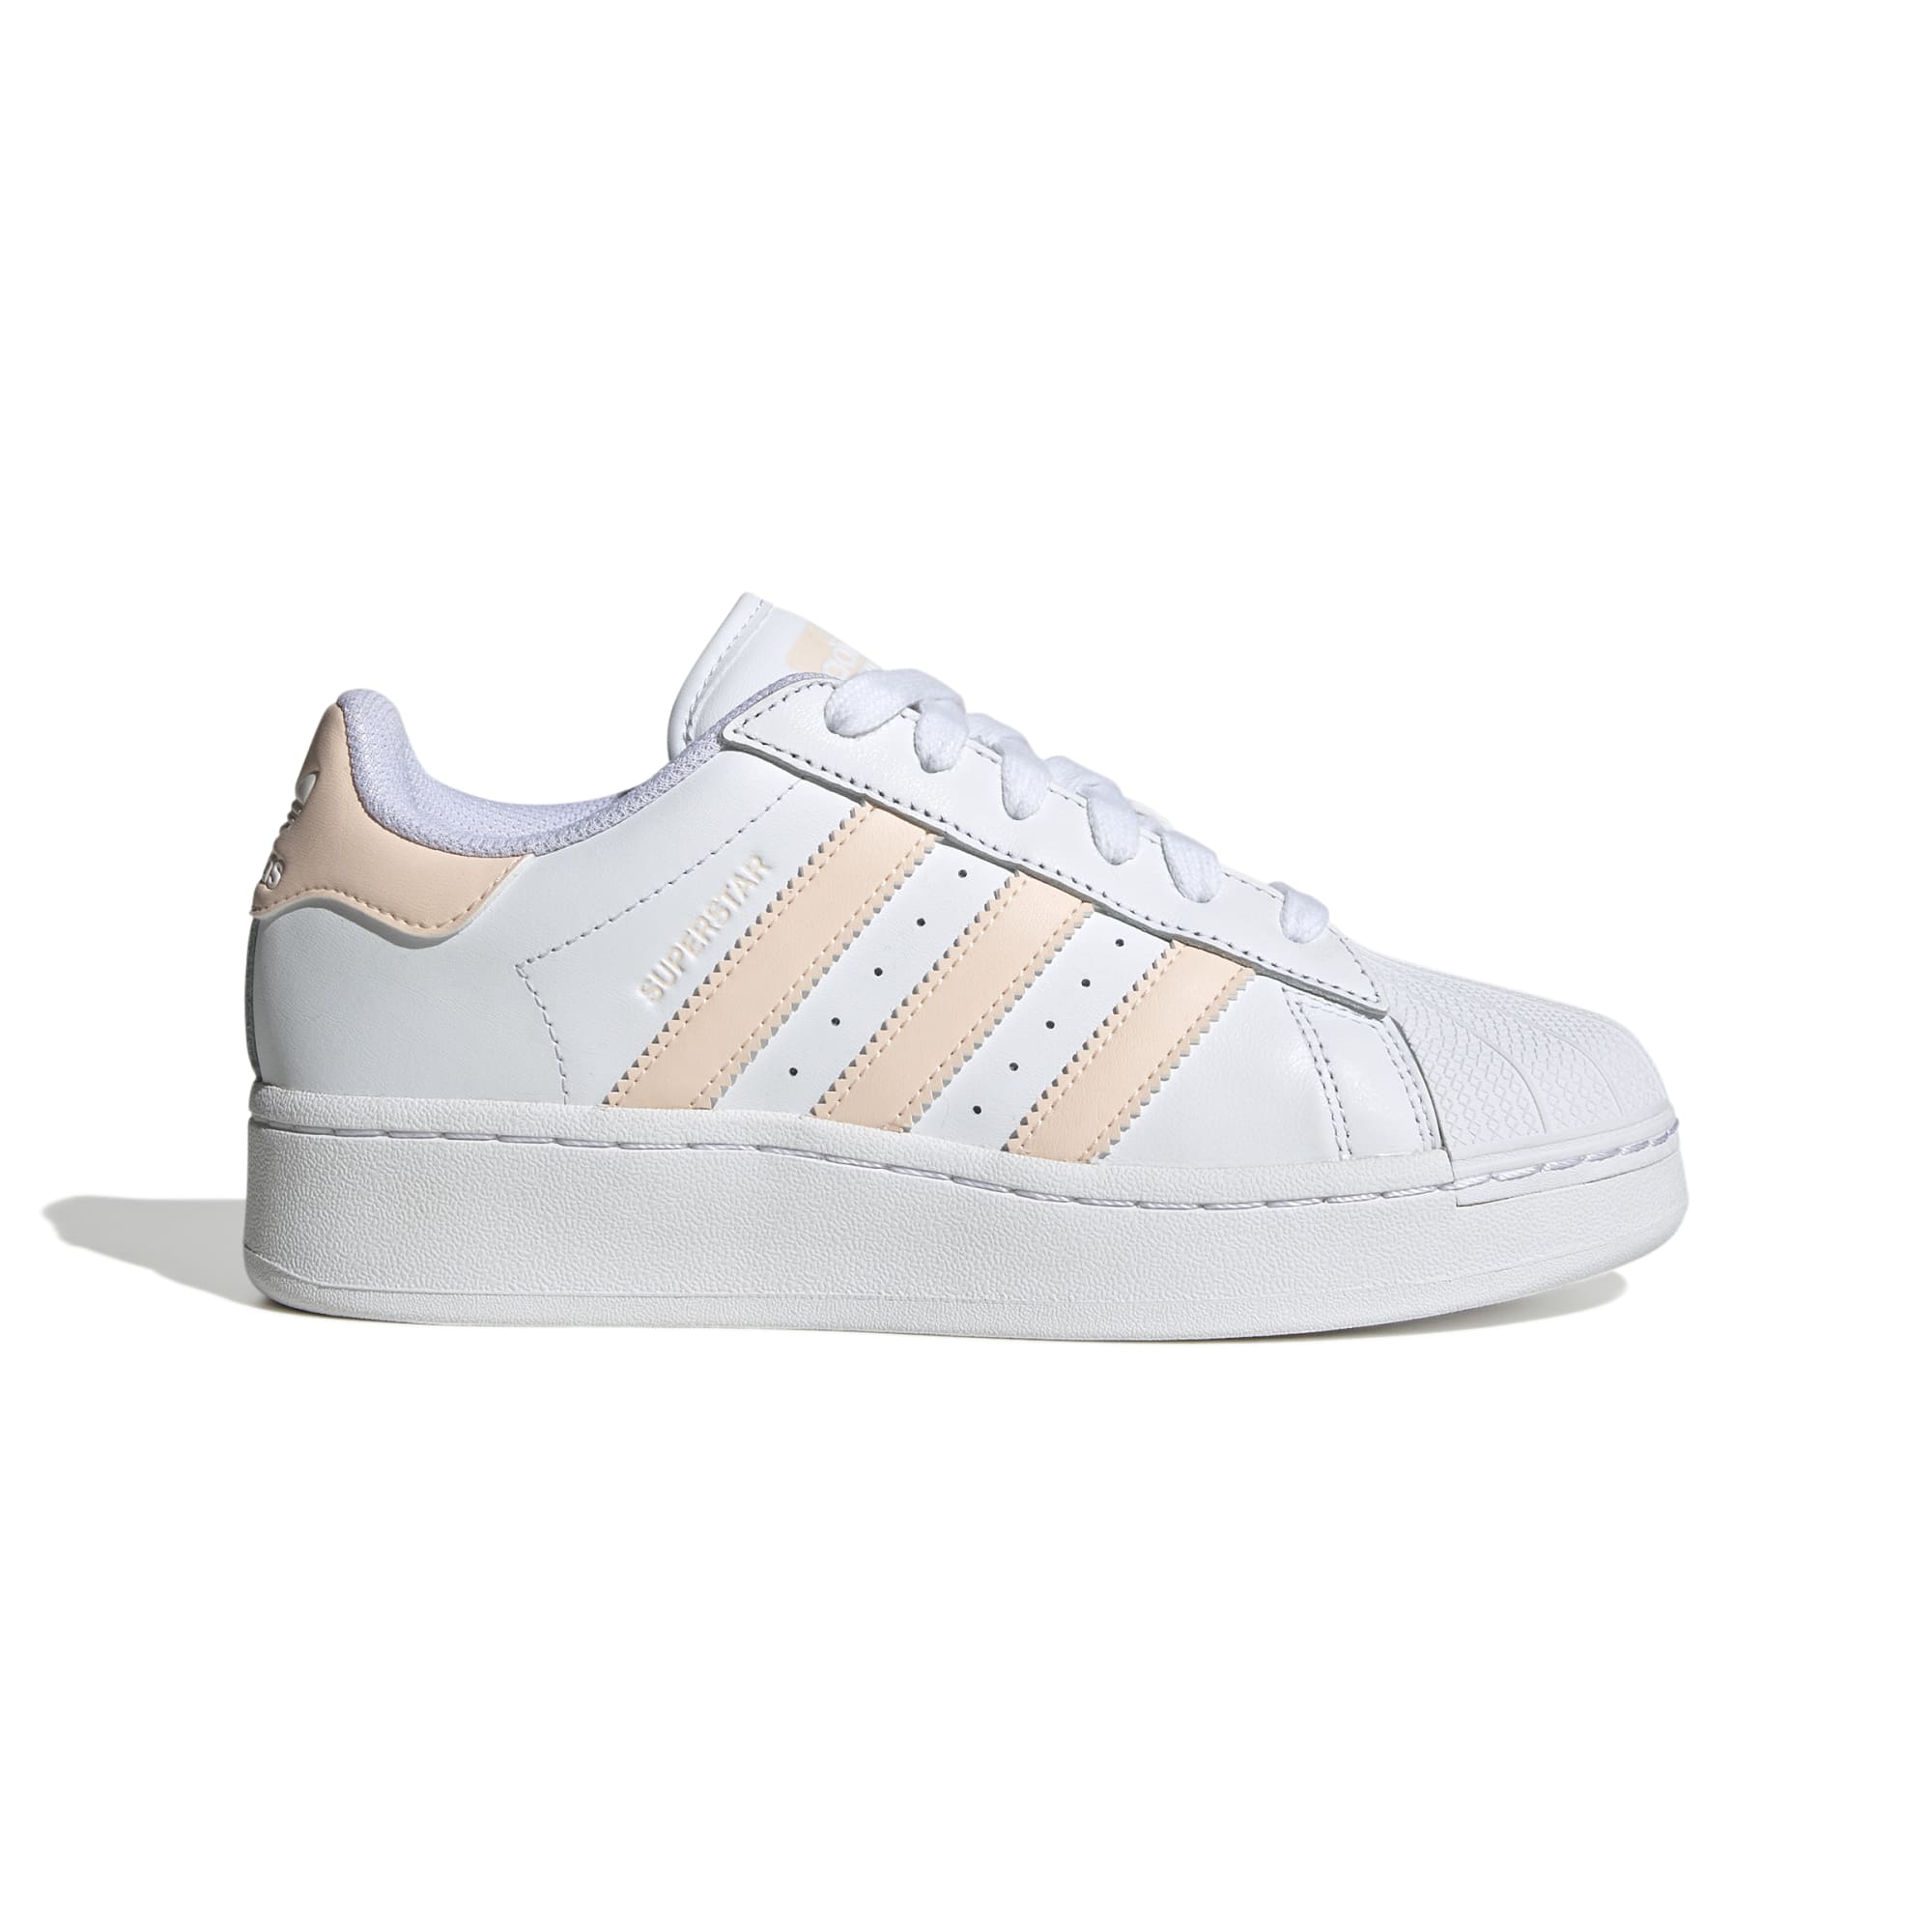 ADIDAS SUPERSTAR XLG W IF3004 SNEAKER (W)